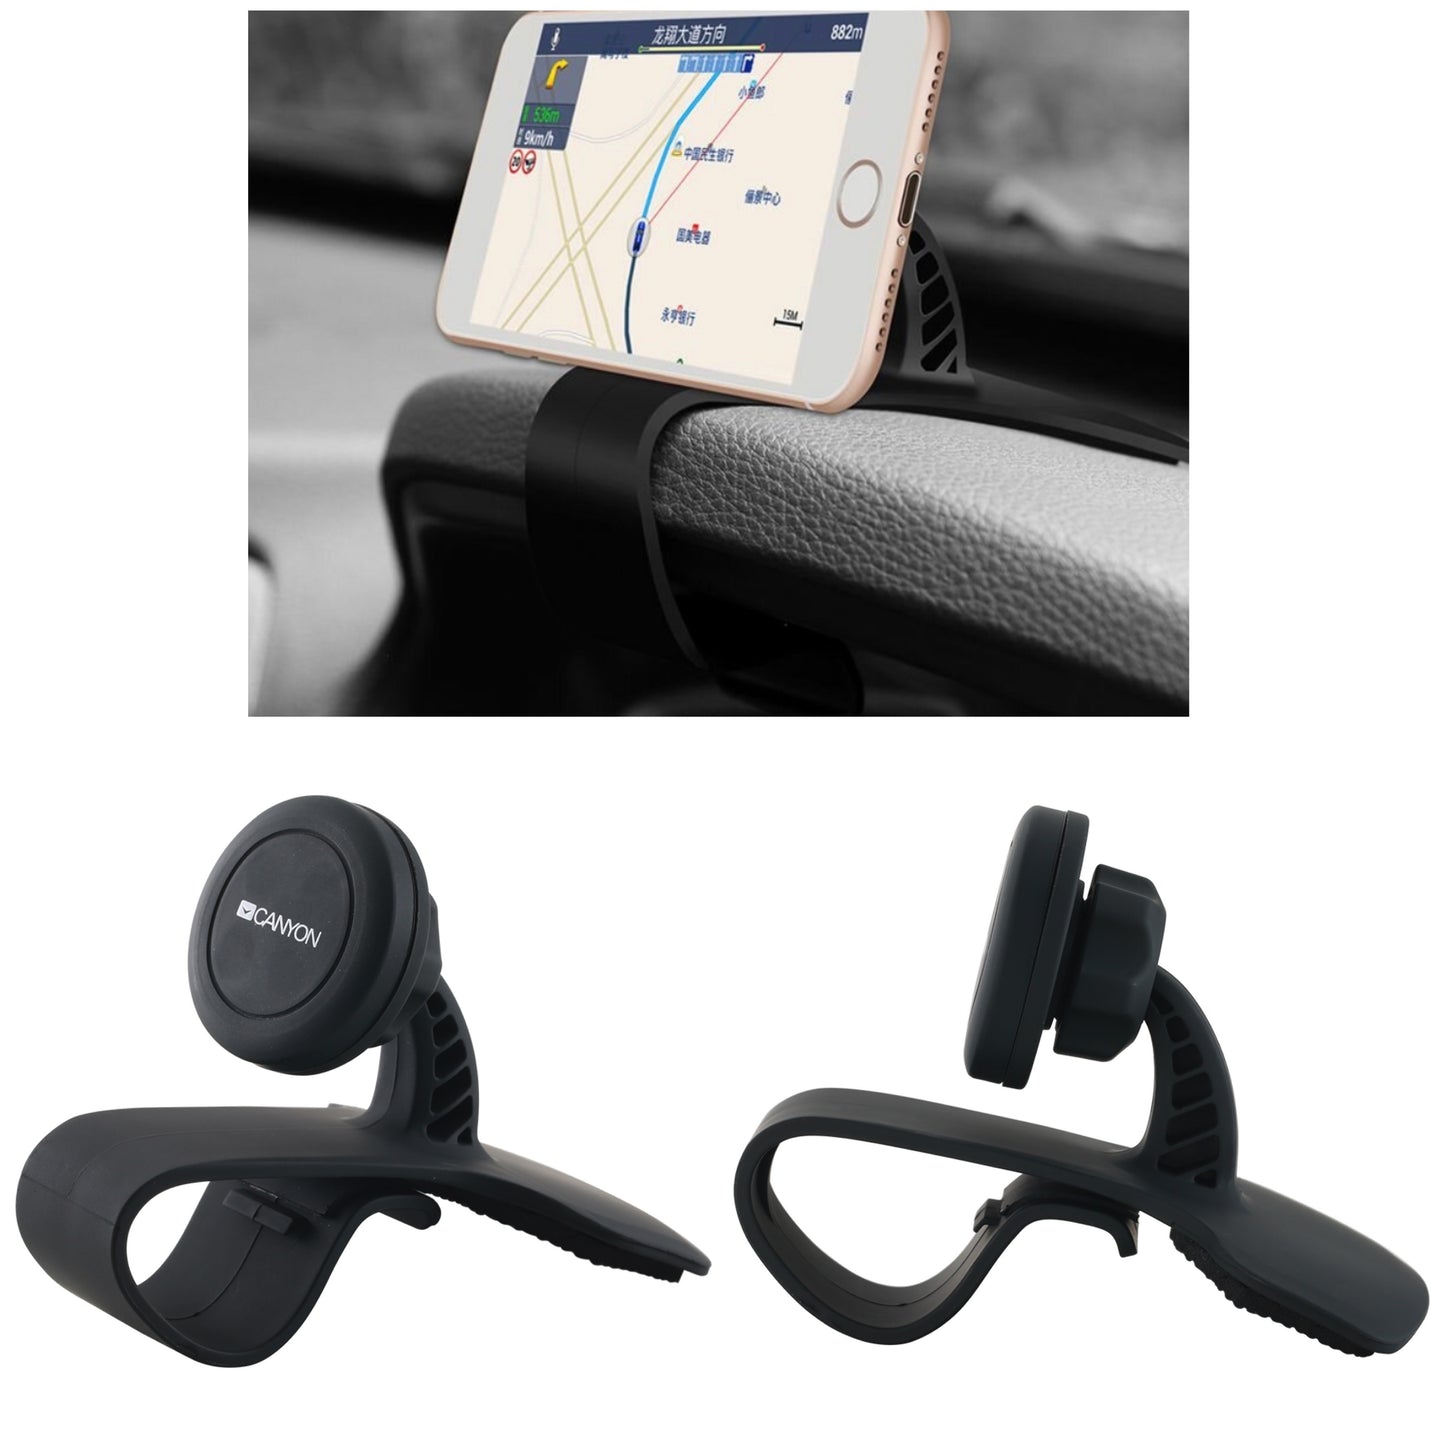 Car Holder For Smartphones, Magnetic Suction Function, With 2 Plates